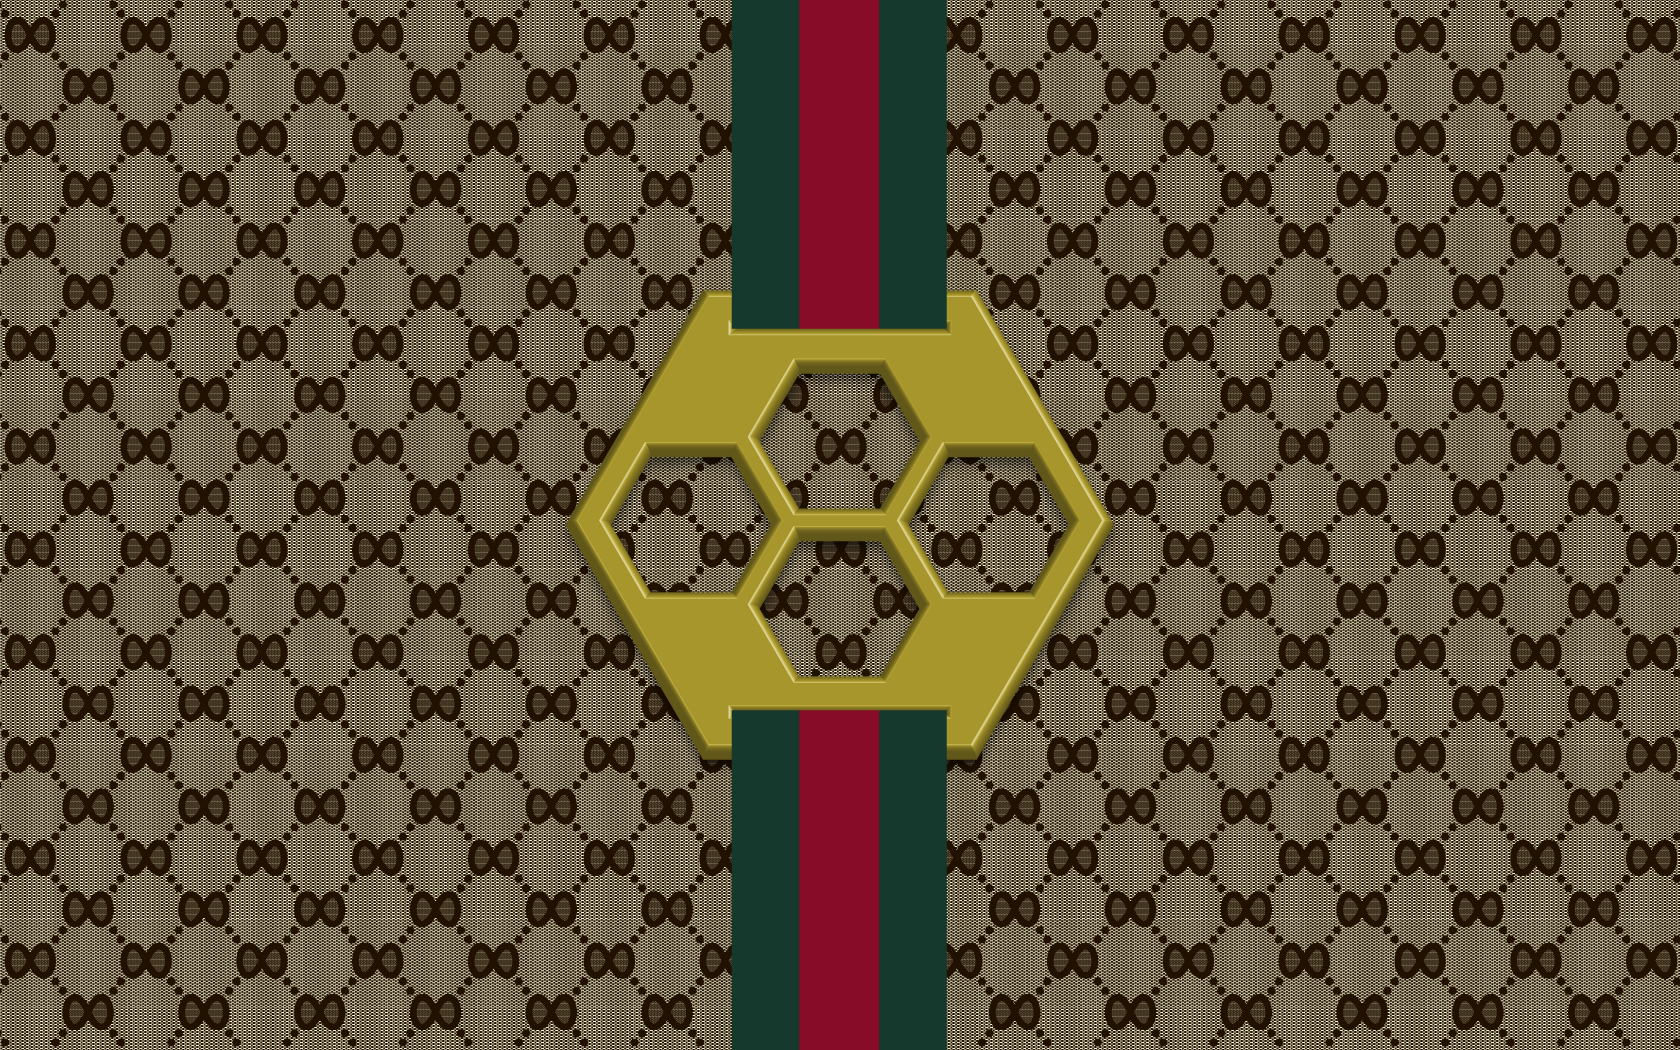 Free download gucci wallpaper for iphone [900x506] for your